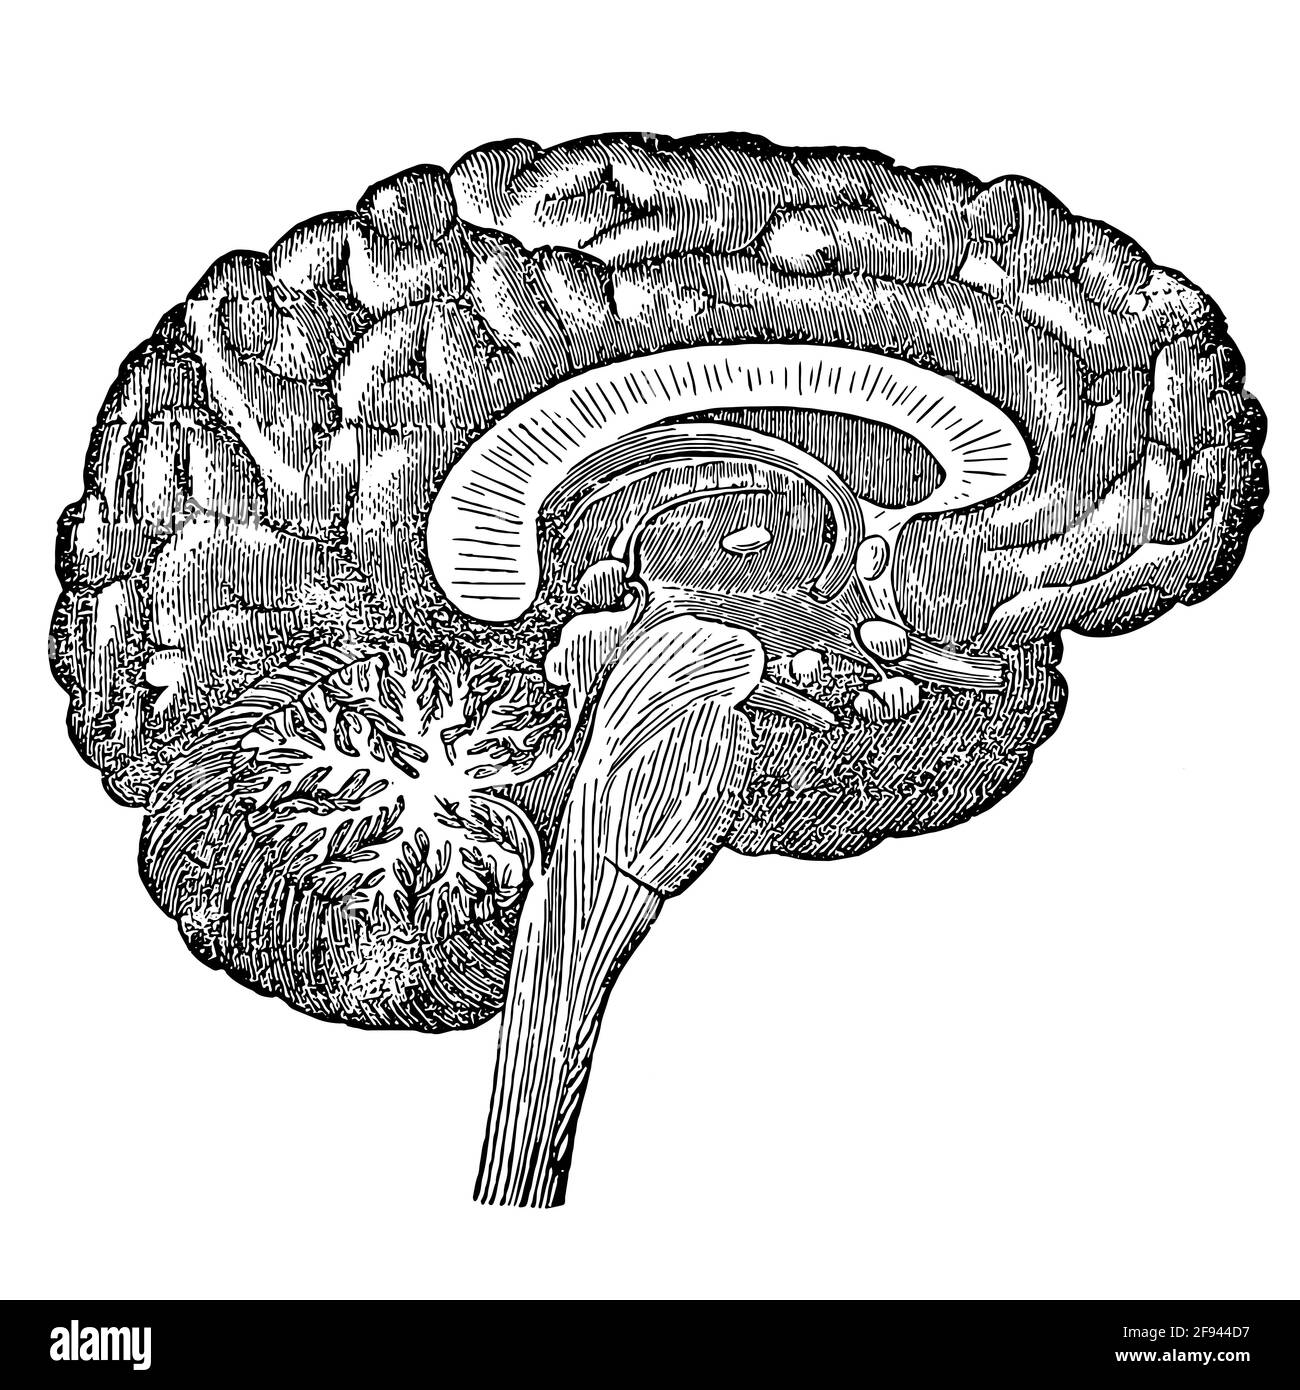 Vintage drawing of brain as an idea and creativity concept Stock Photo